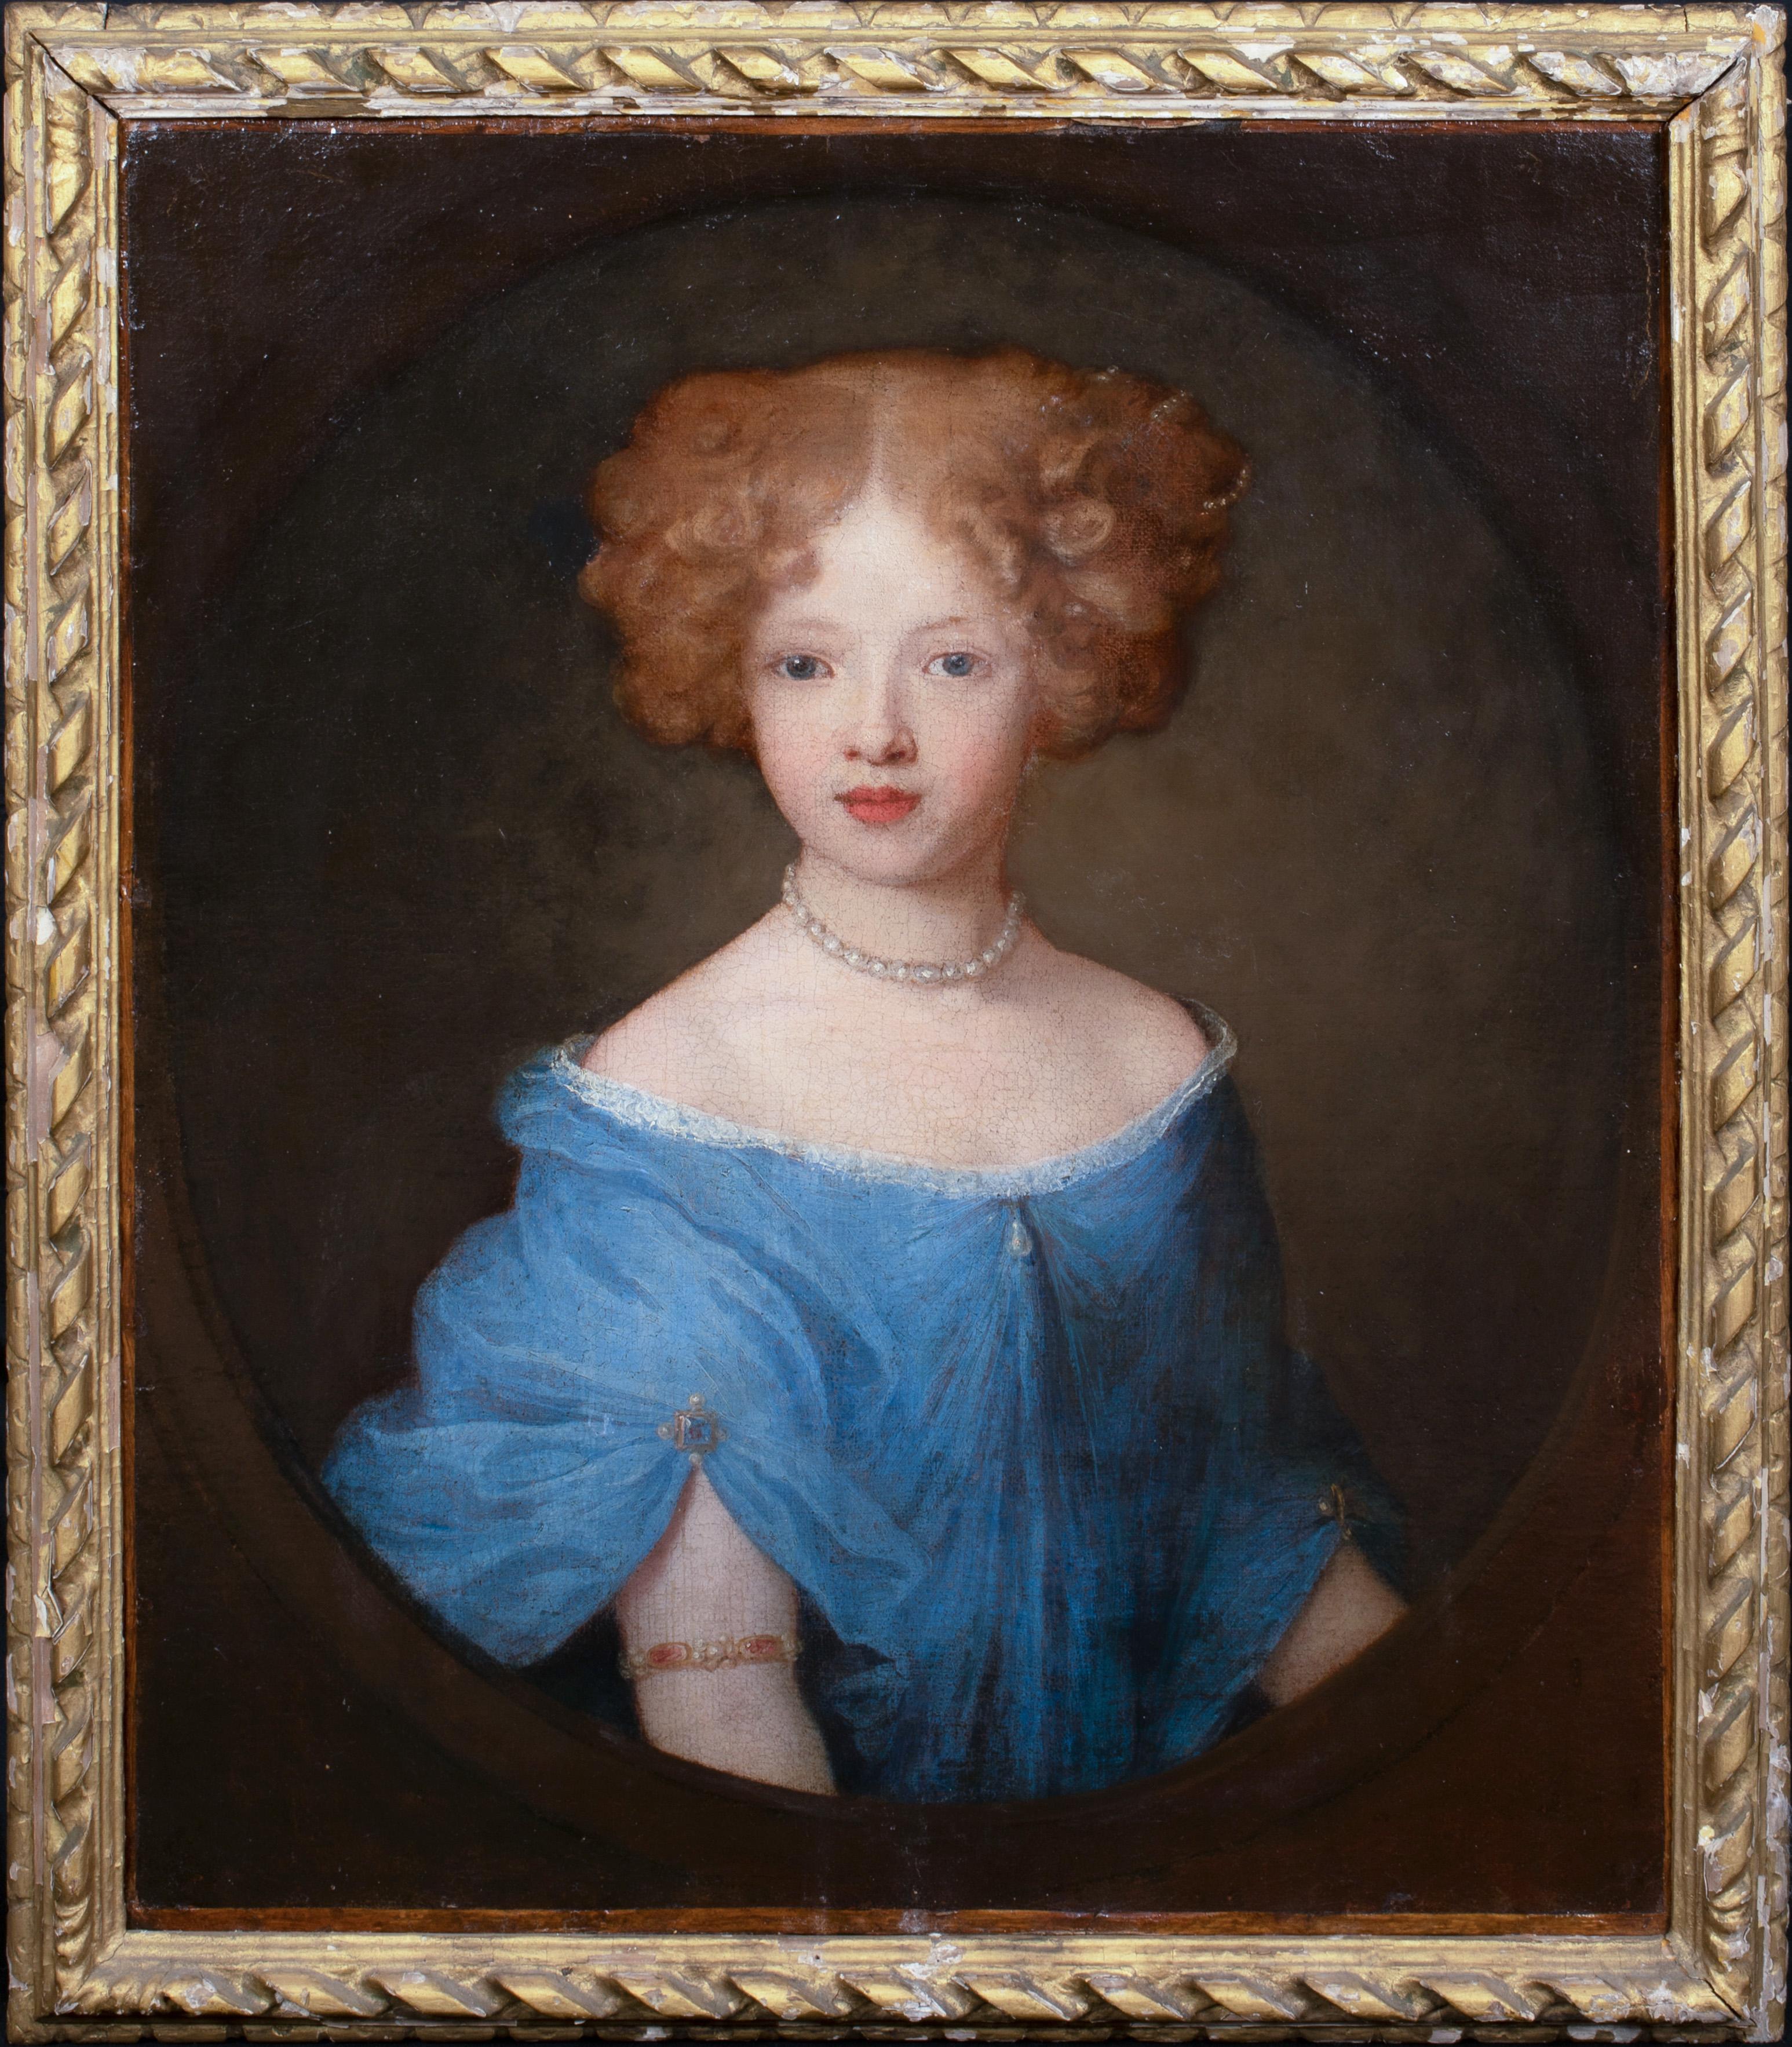 Portrait Of A Girl In A Blue Dress, 17th Century - Painting by Unknown